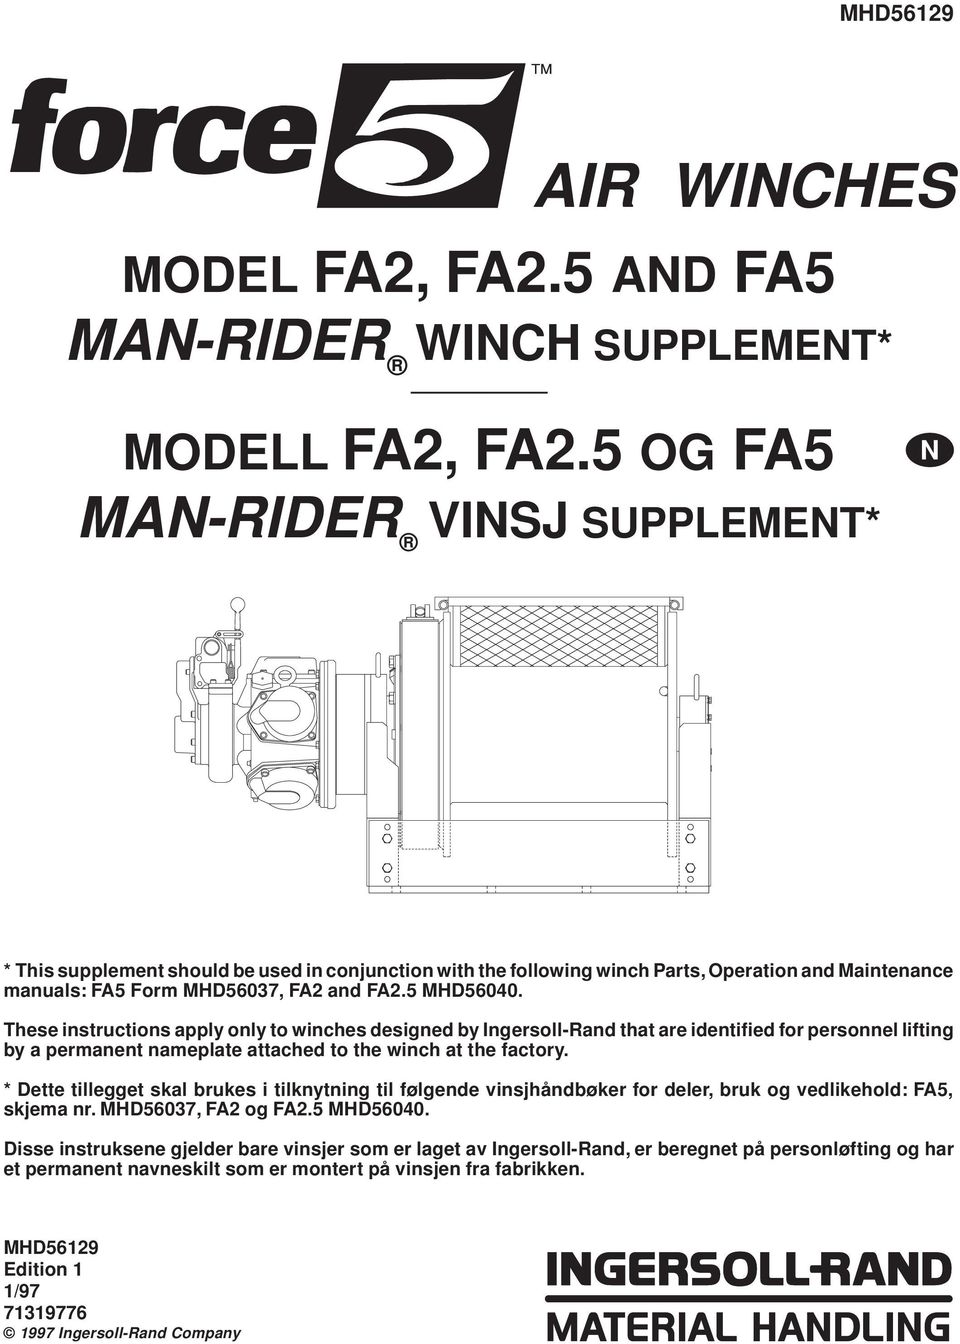 These instructions apply only to winches designed by Ingersoll-Rand that are identified for personnel lifting by a permanent nameplate attached to the winch at the factory.